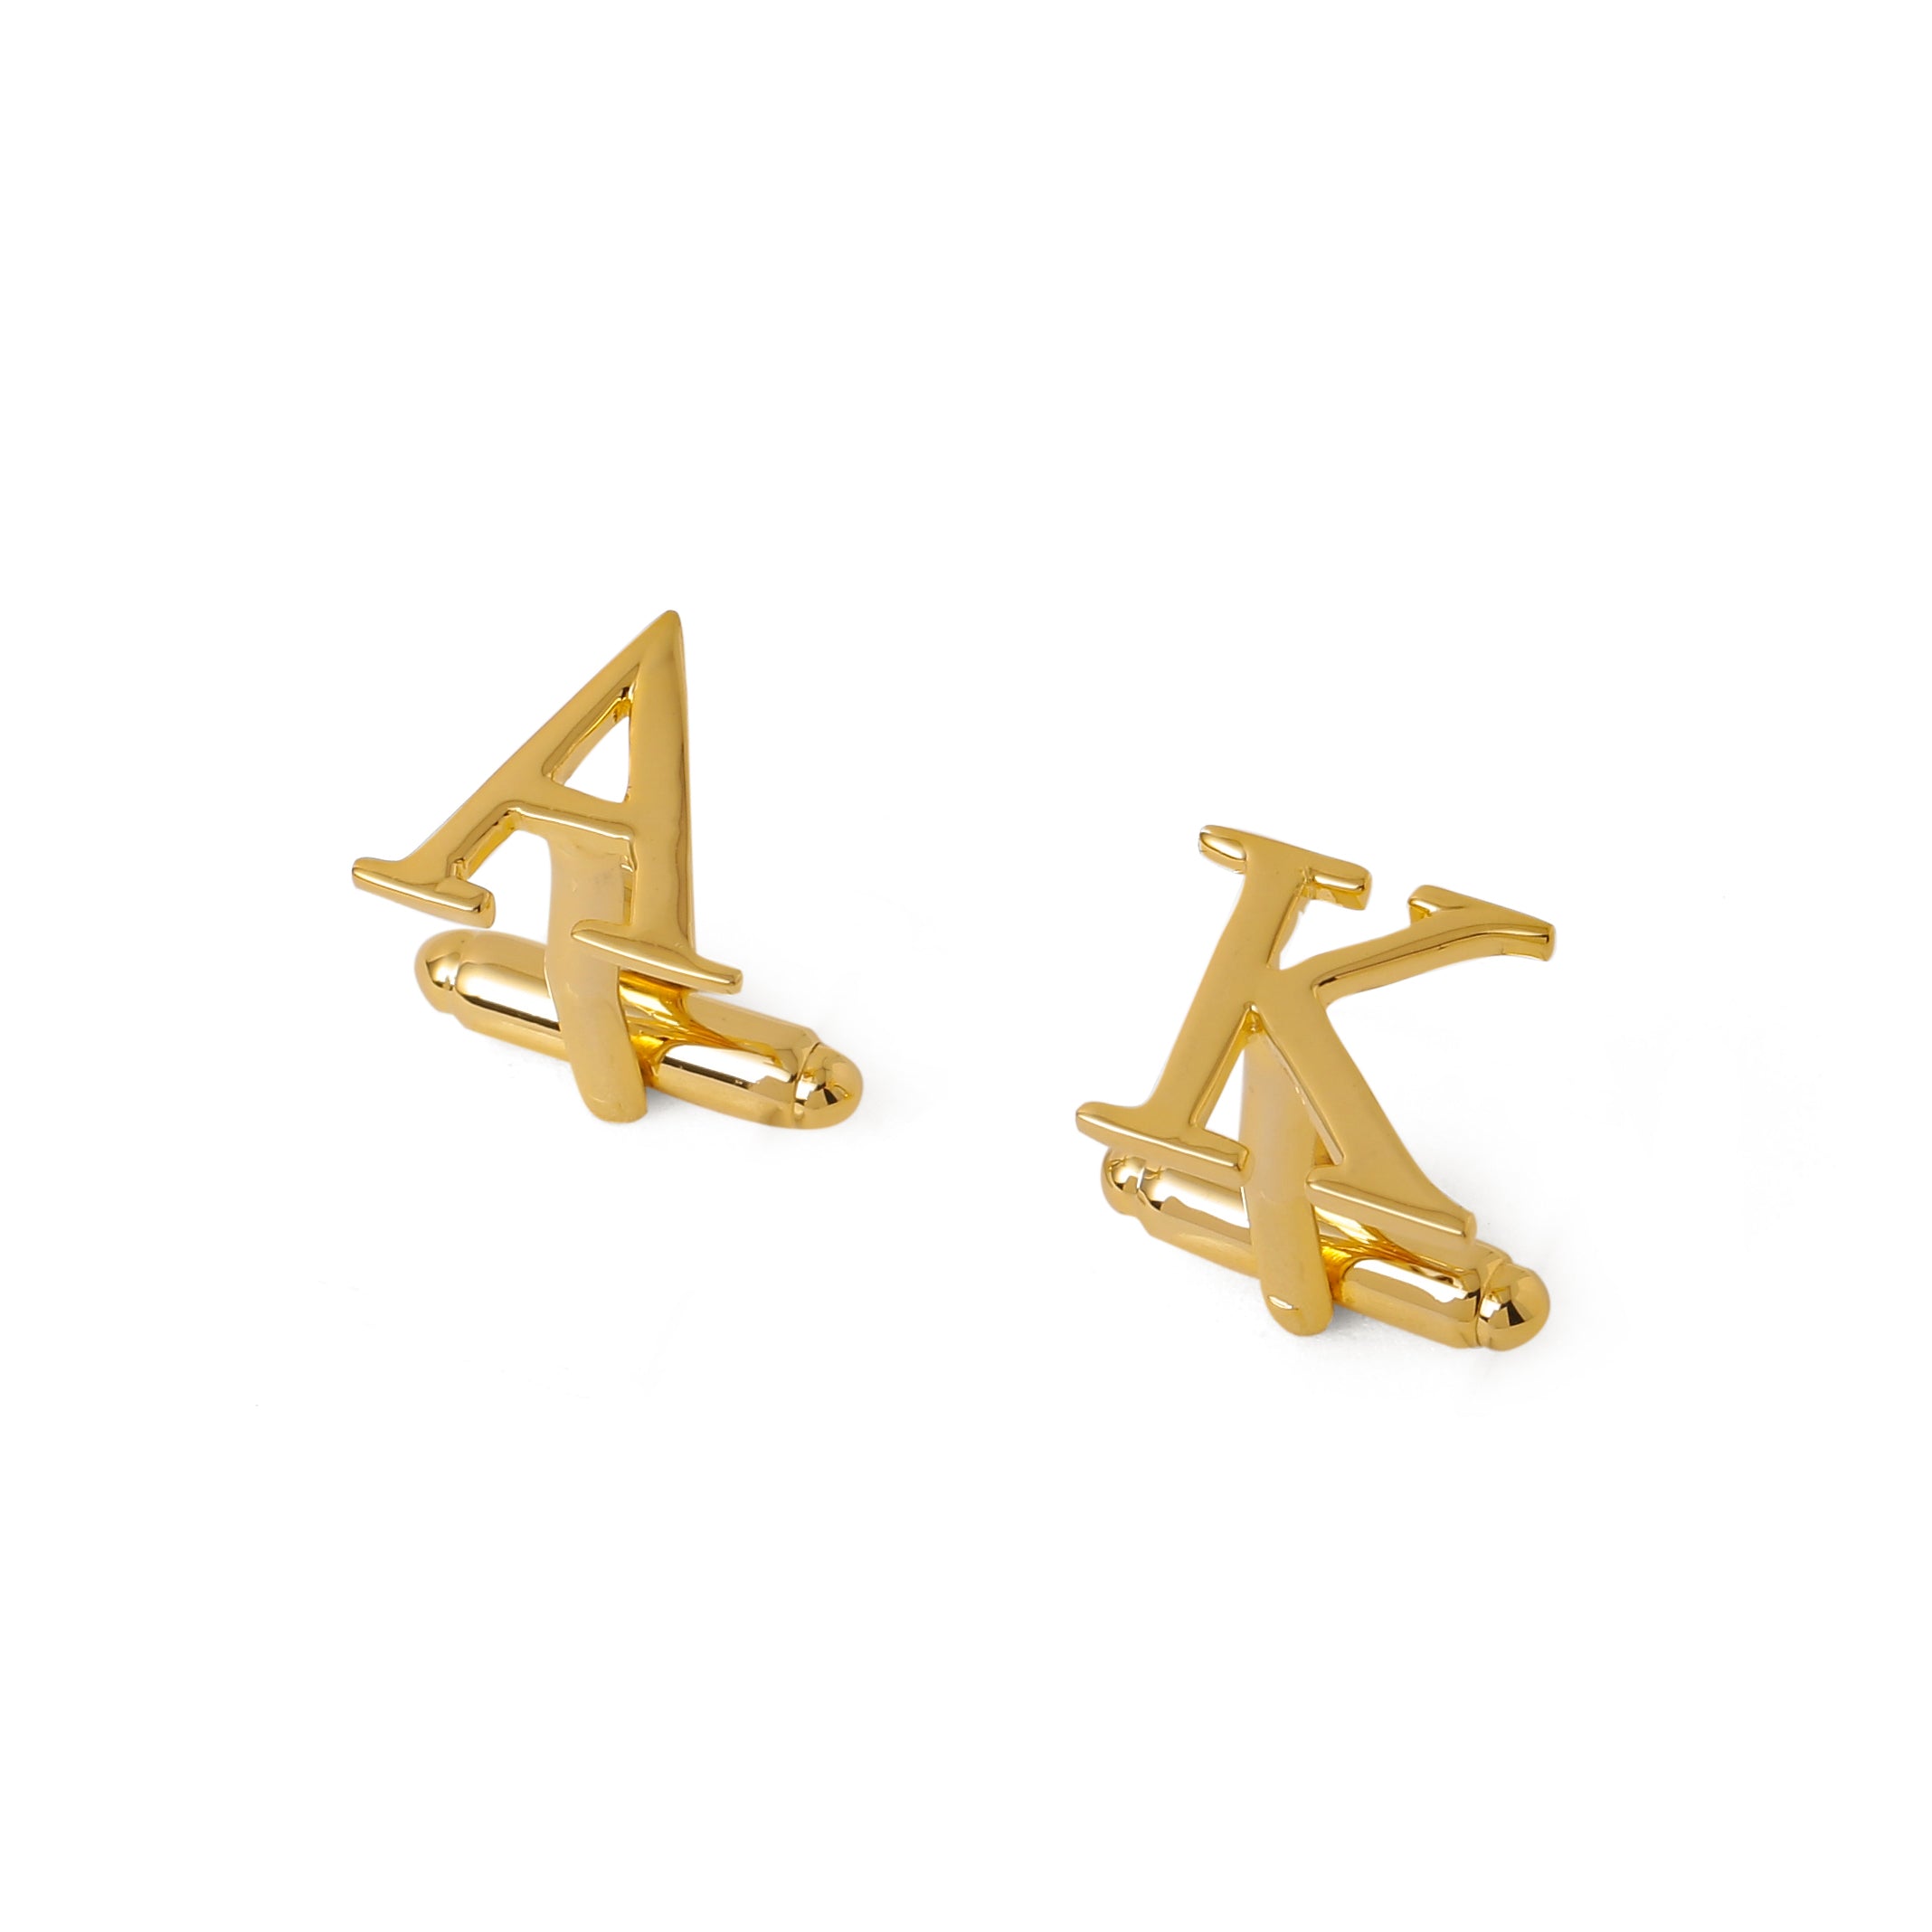 Individual Initial Cufflinks with Engraving